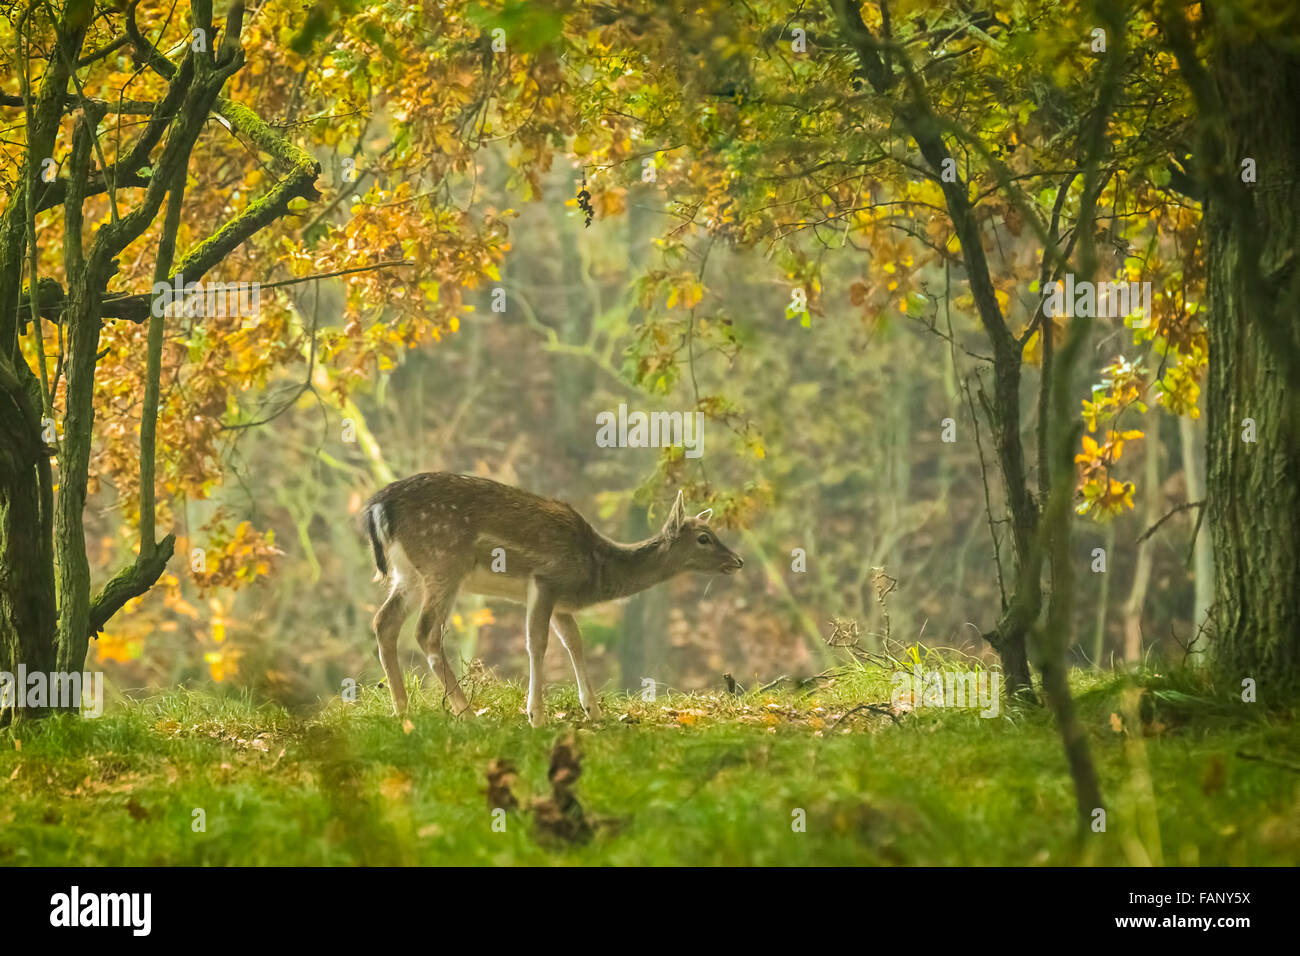 Fallow deer (Dama Dama) fawn in Autumn season. The Autumn fog and nature colors are clearly visible on the background. Stock Photo